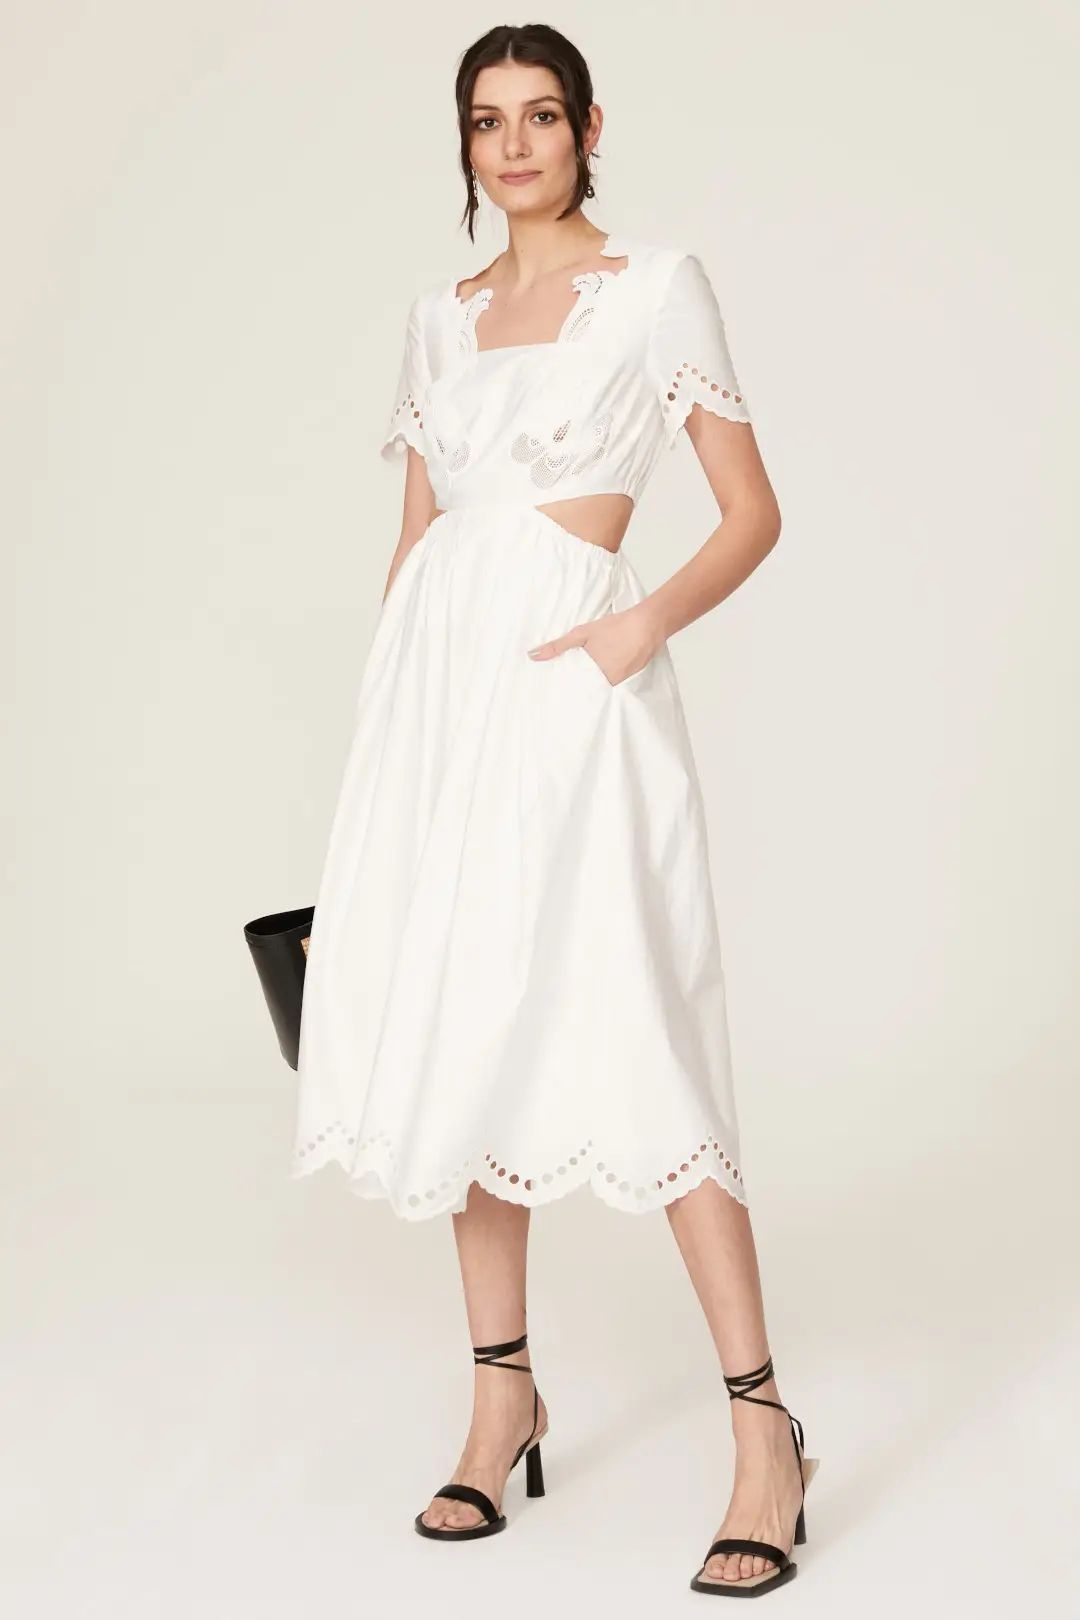 Broderie Scallop Midi Dress | Rent the Runway